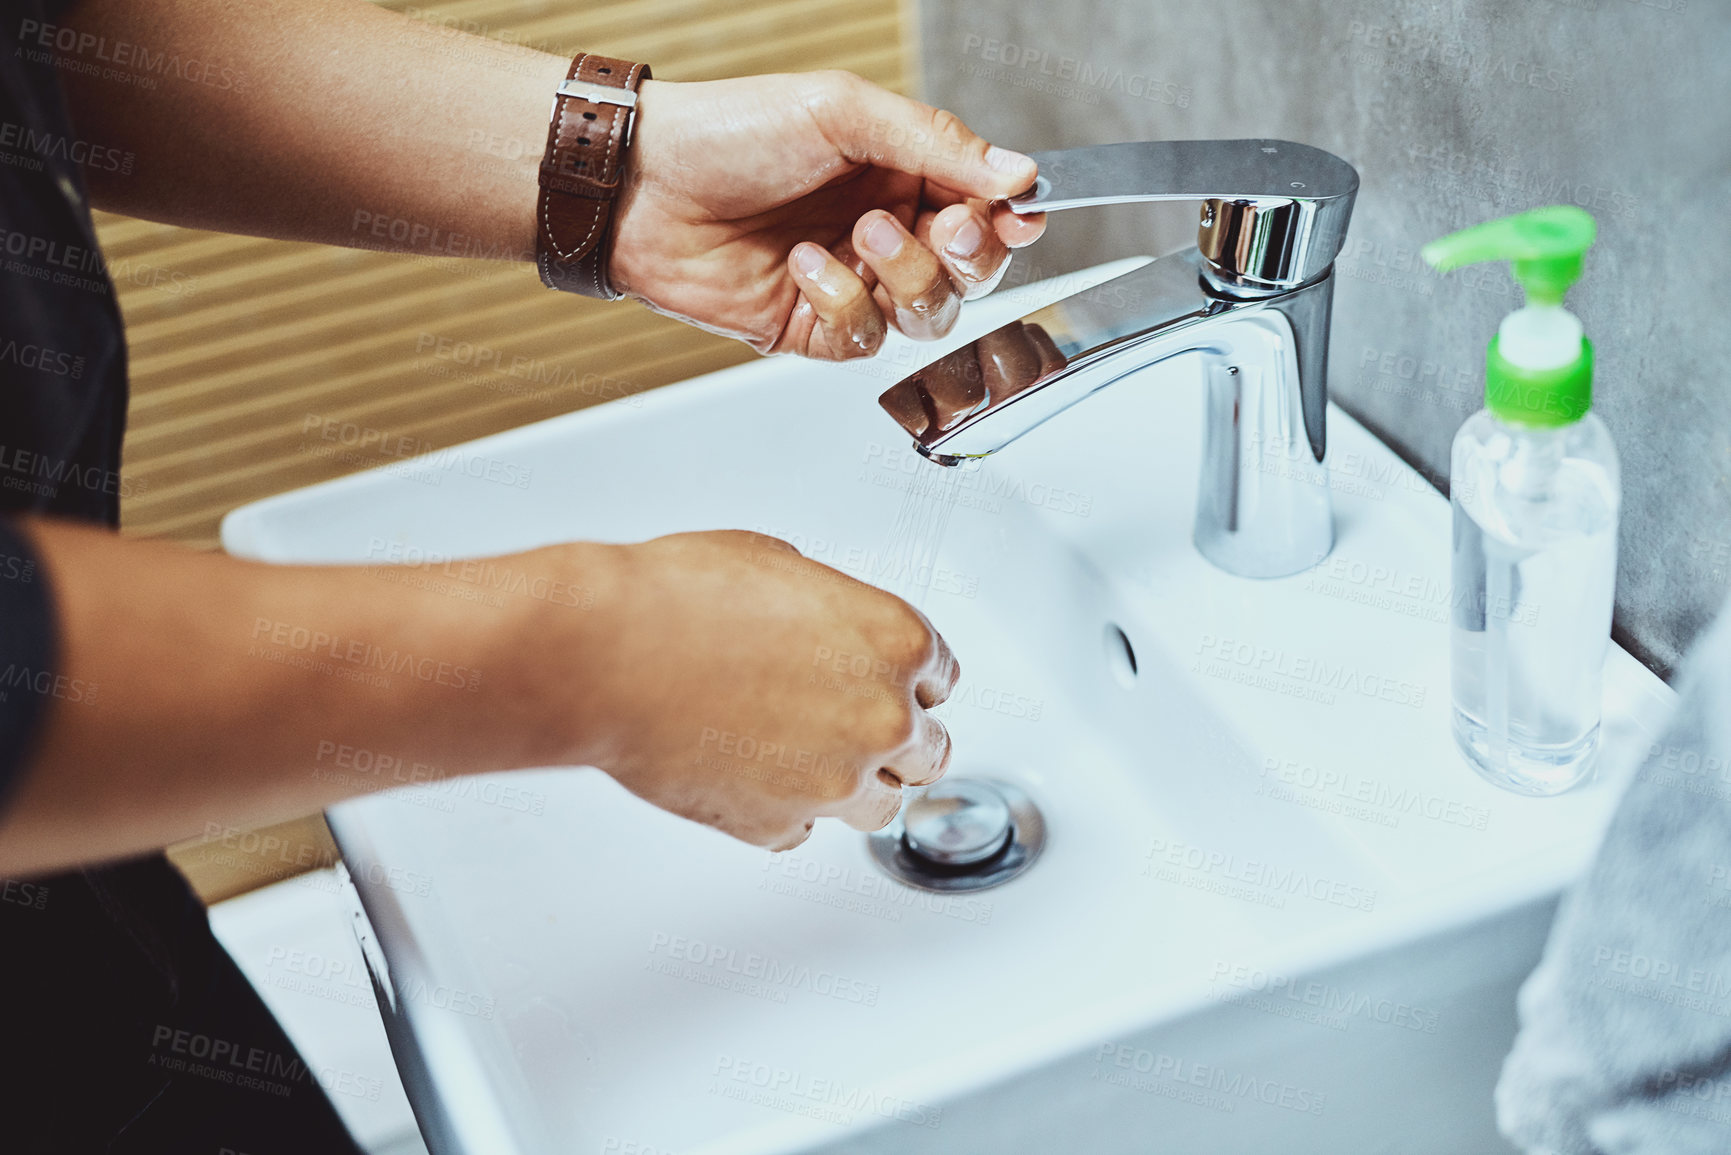 Buy stock photo Cropped shot of an unrecognisable man washing his hands in the bathroom sink